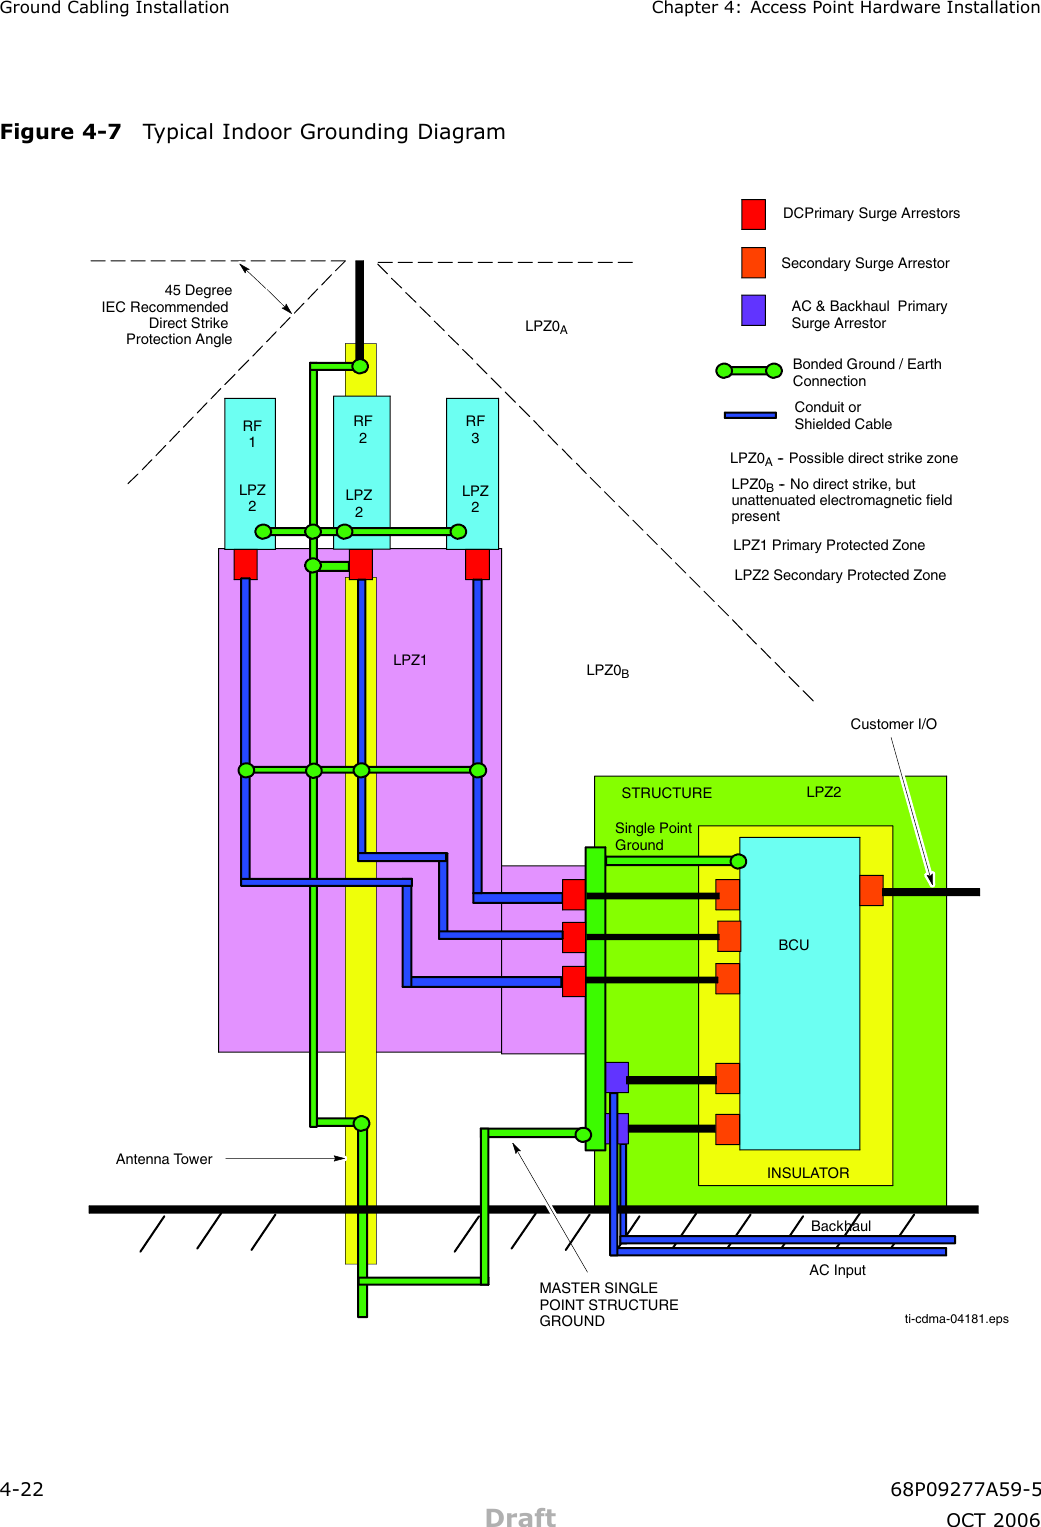 Ground Cabling Installation Chapter 4: Access P oint Hardw are InstallationFigure 4 -7 T ypical Indoor Grounding Diagr amti-cdma-04181.epsDCPrimary Surge ArrestorsSecondary Surge ArrestorAC &amp; Backhaul PrimarySurge ArrestorBonded Ground / EarthConnectionConduit orShielded CableLPZ1LPZ2 Secondary Protected ZoneLPZ0ALPZ0BAntenna Tower45 DegreeIEC RecommendedDirect StrikeProtection AngleRF1RF2RF3BCUINSULATORCustomer I/OMASTER SINGLEPOINT STRUCTUREGROUNDLPZ0A-- Possible direct strike zoneLPZ0B-- No direct strike, butunattenuated electromagnetic fieldpresentLPZ1 Primary Protected ZoneLPZ2LPZ2LPZ2LPZ2Single PointGroundAC InputBackhaulSTRUCTURE4 -22 68P09277A59 -5Draft OCT 2006